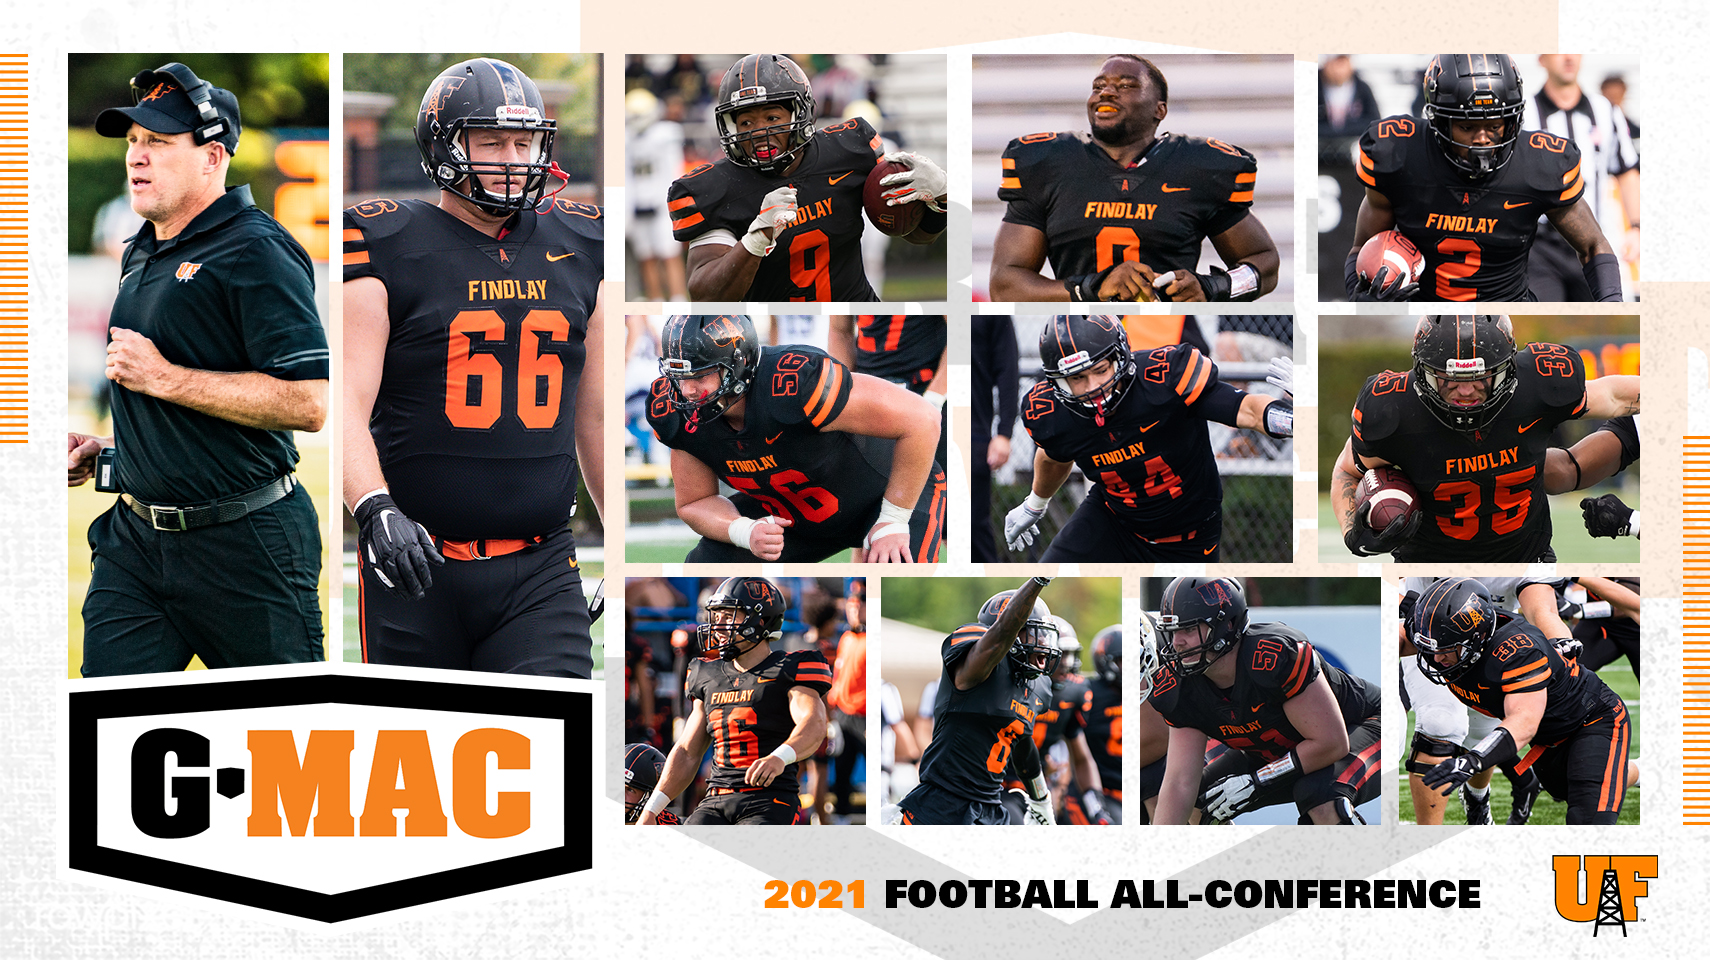 Oilers Lead G-MAC with 21 All-Conference Picks | Keys Named Coach of the Year